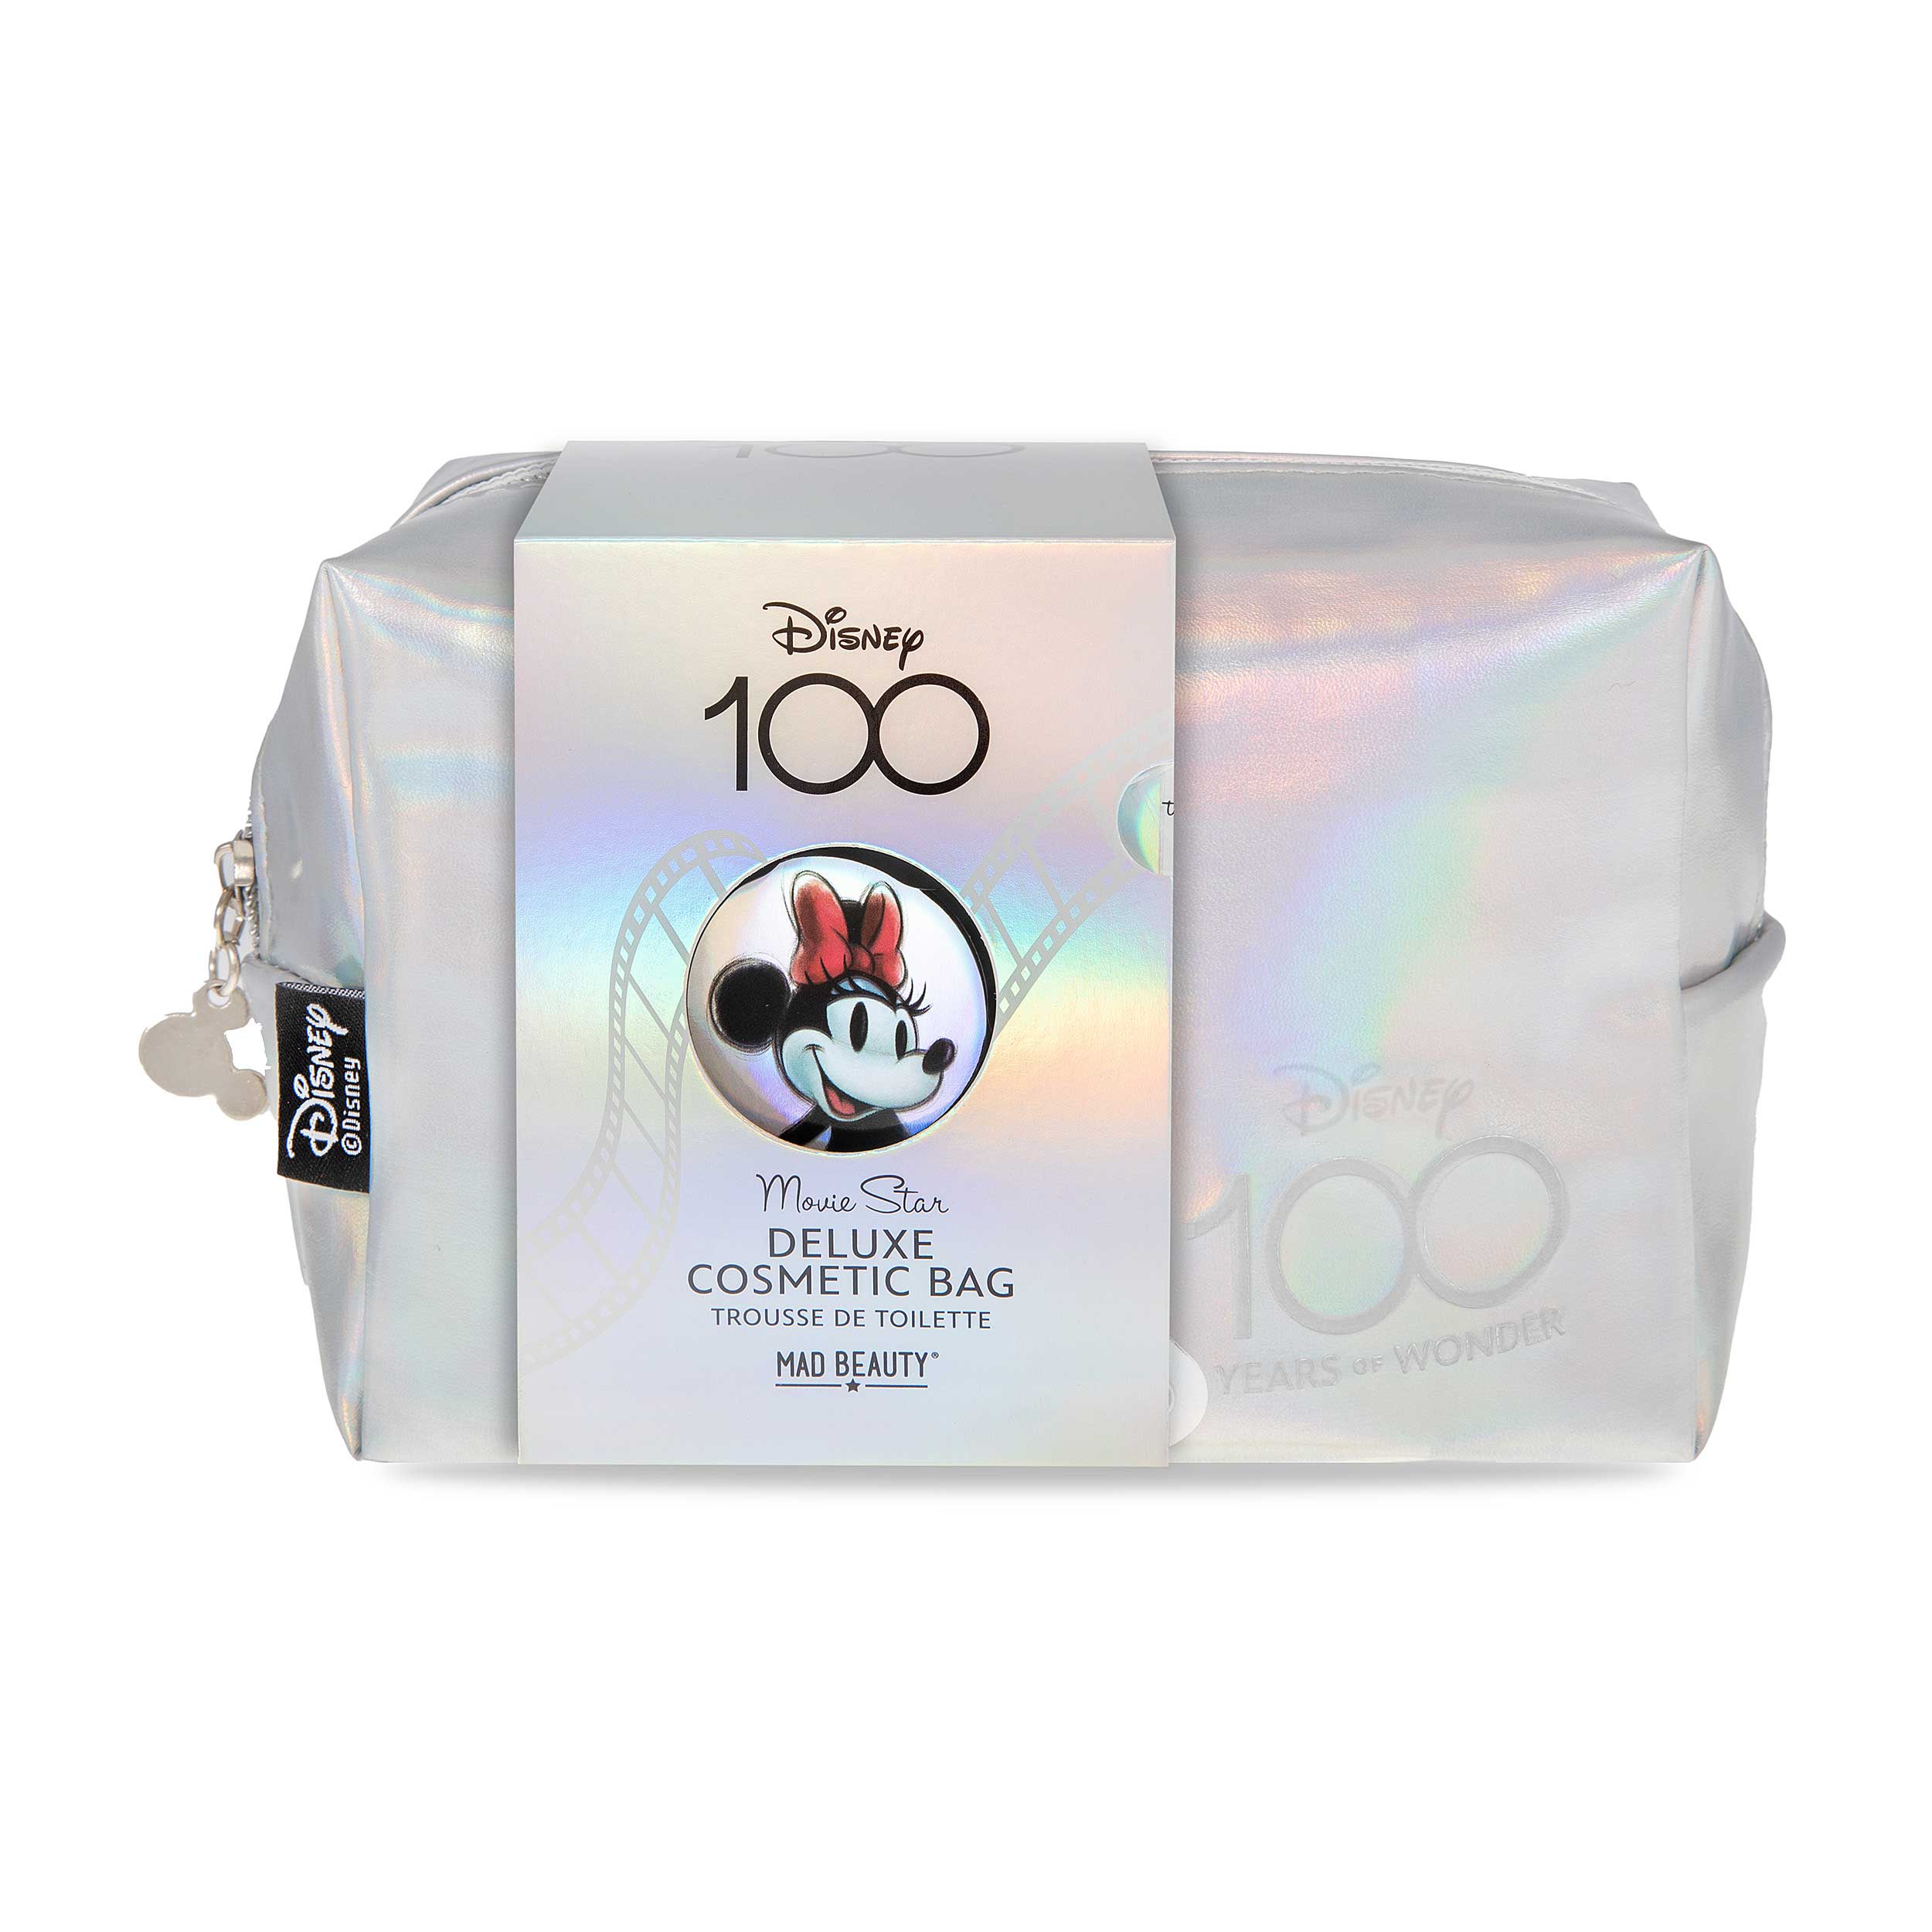 Disney 100 Cosmetic Bag by Mad Beauty